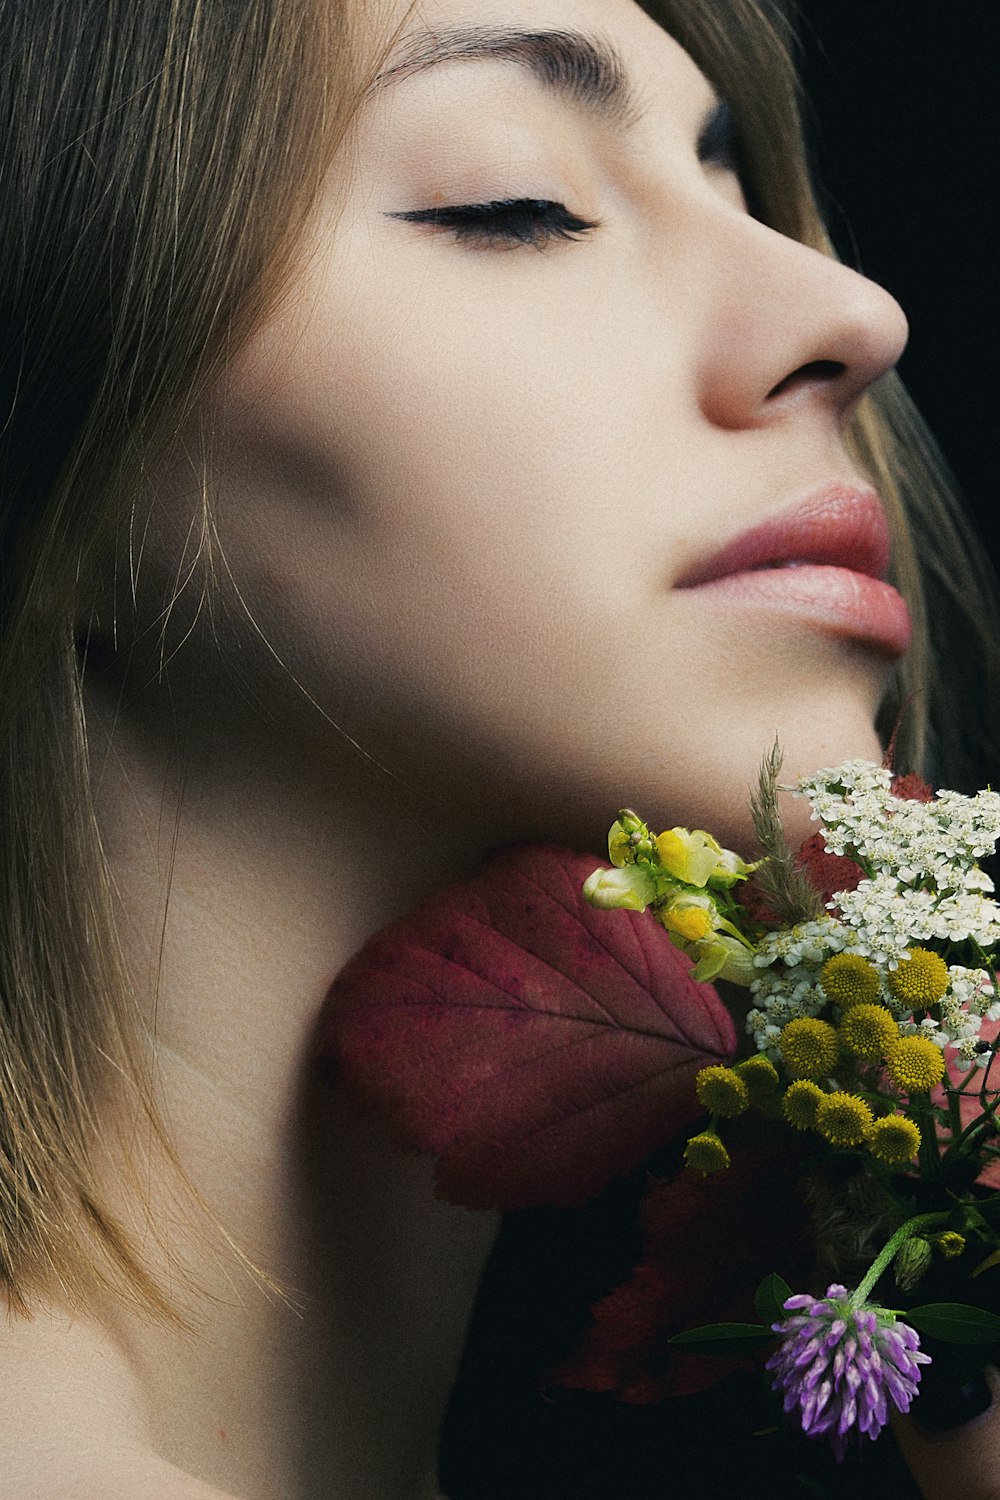 woman closing her eyes next to flowers